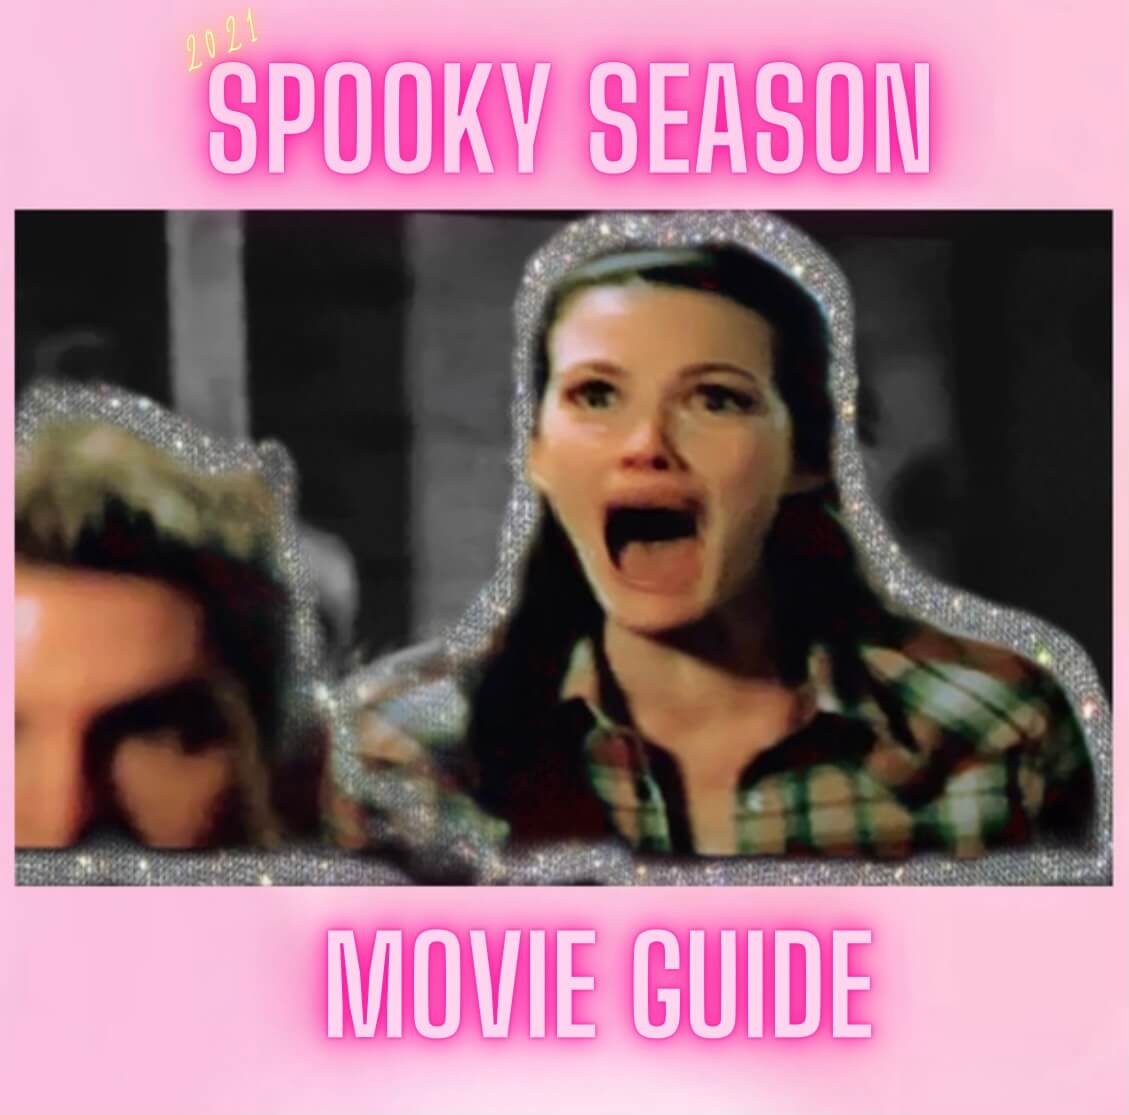 image of a scene from the strangers with spooky season movie guide written across